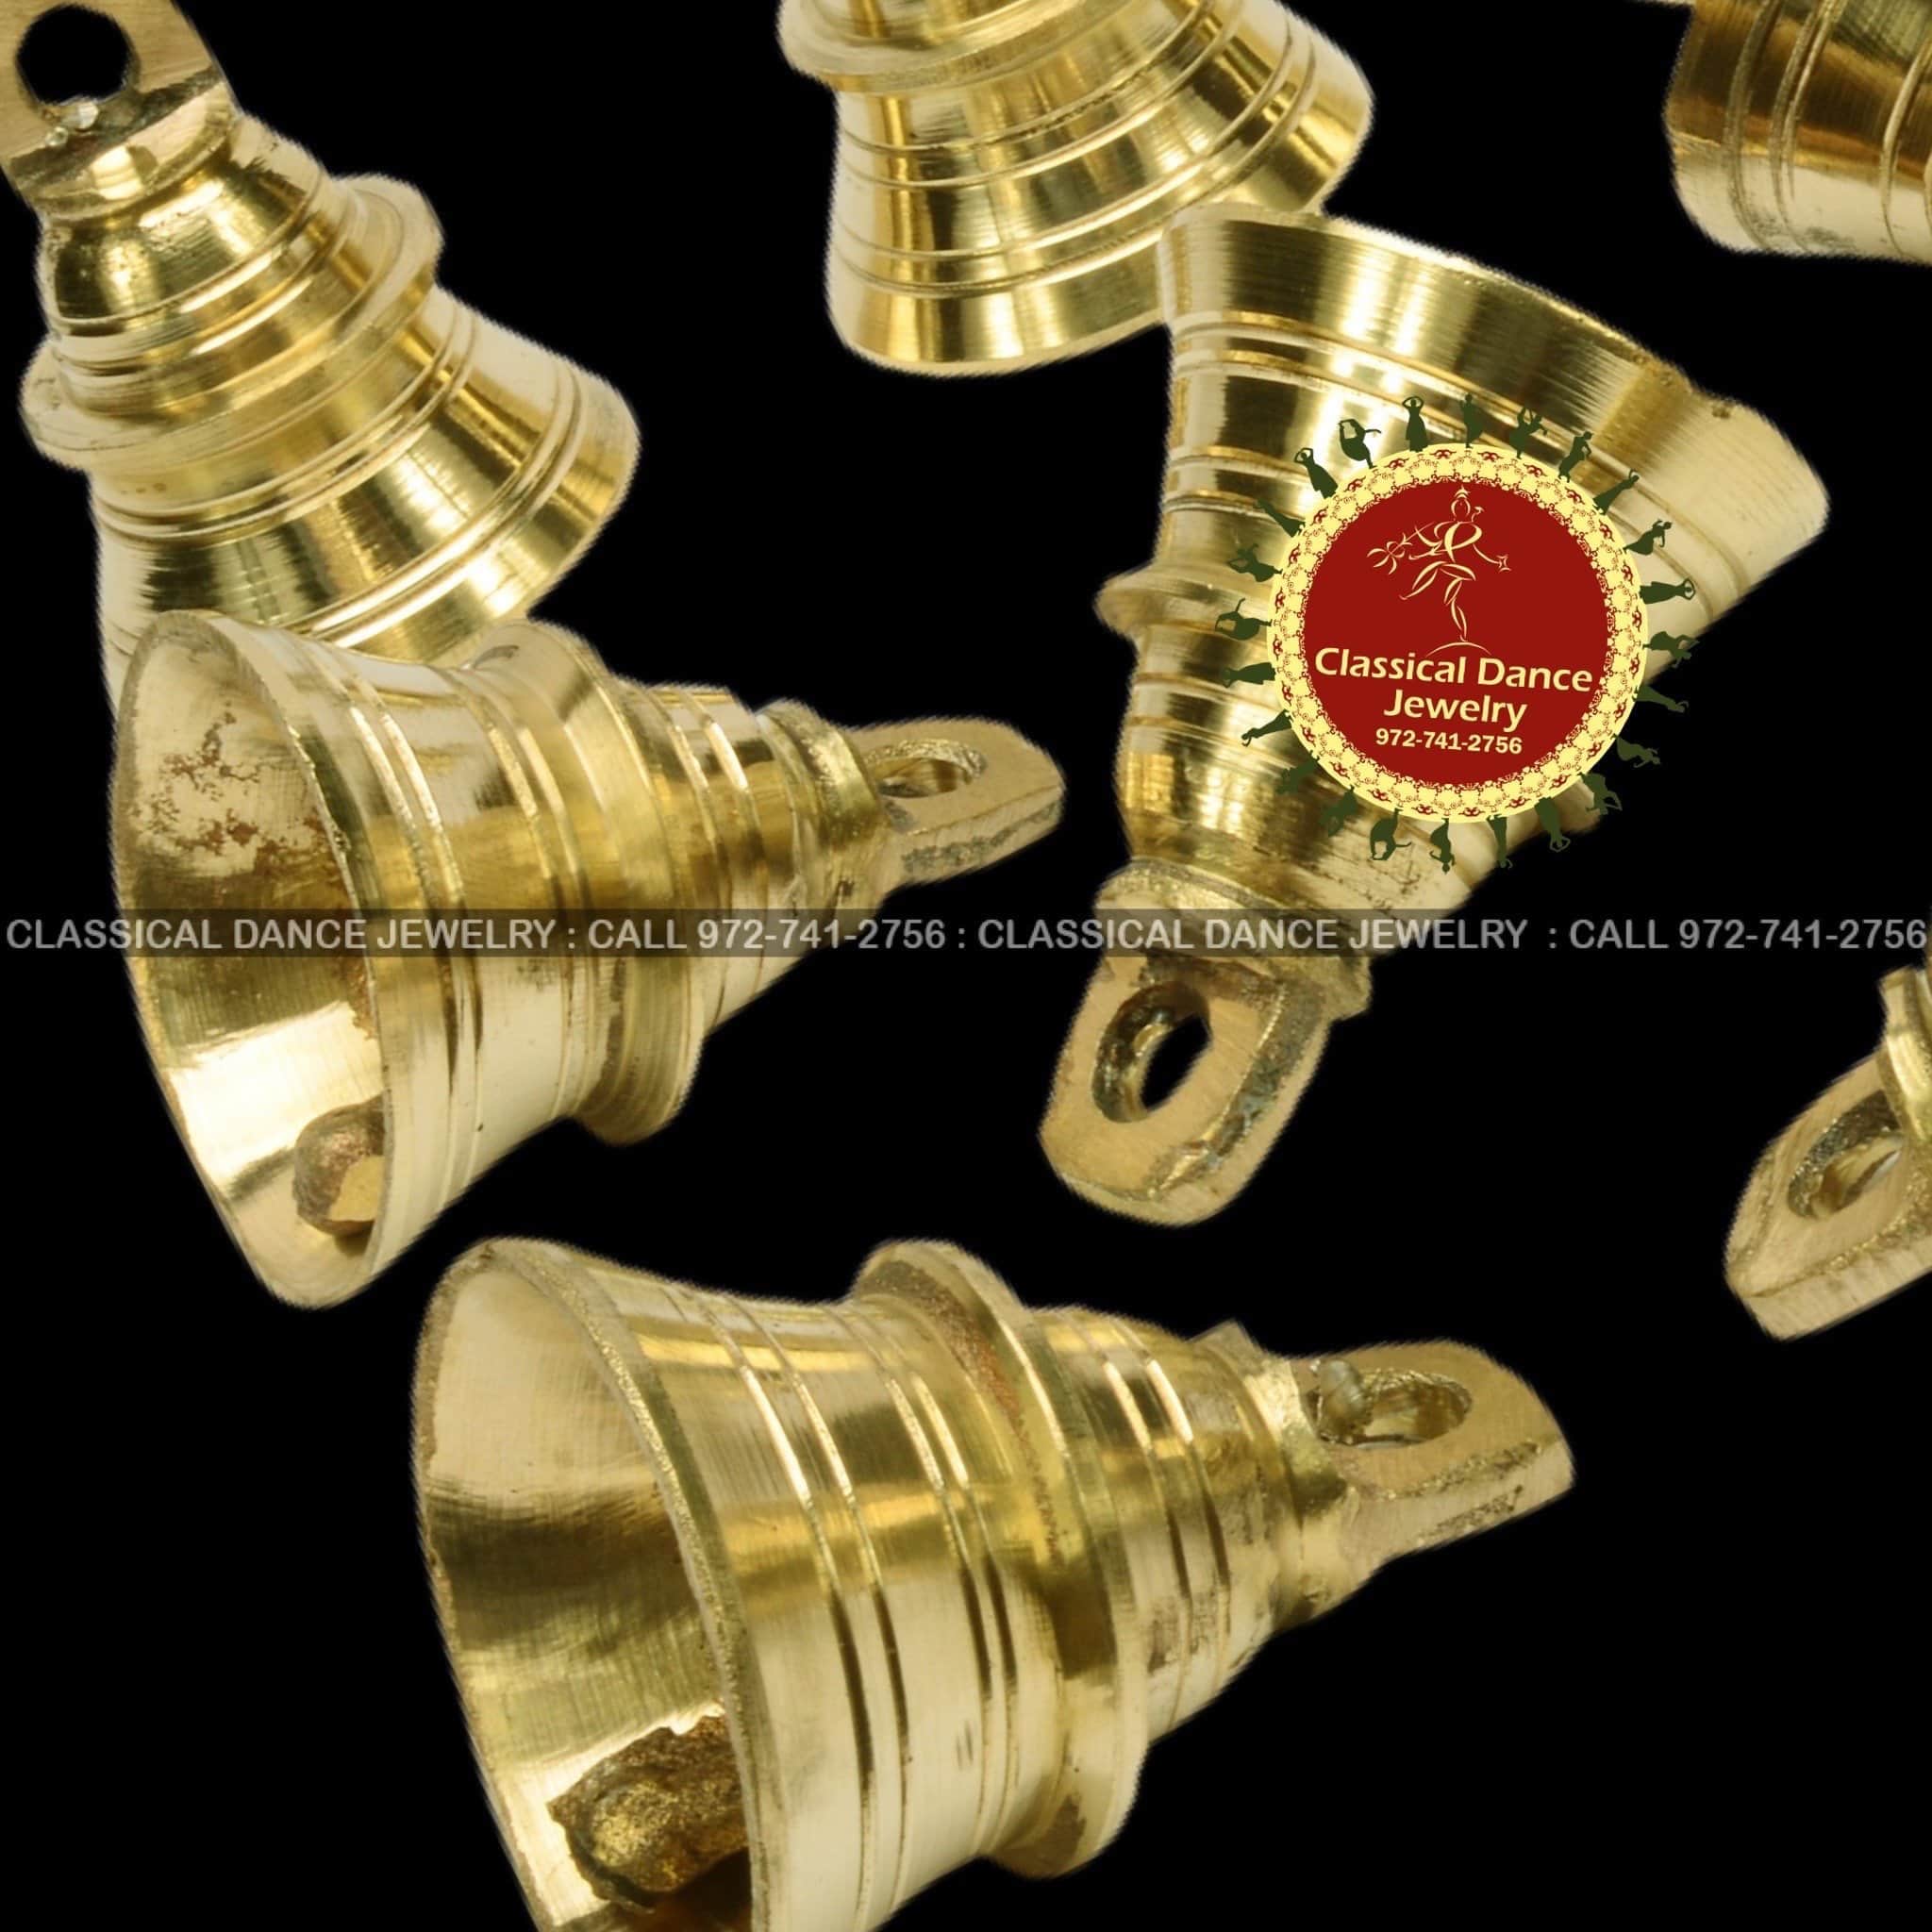 https://classicaldancejewelry.net/cdn/shop/products/classical-dance-jewelry-home-wall-decor-vintage-indian-brass-bells-home-decor-1-6-inch-temple-decorations-events-puja-festivals-classical-dance-jewelry-19293510074533.jpg?v=1603568727